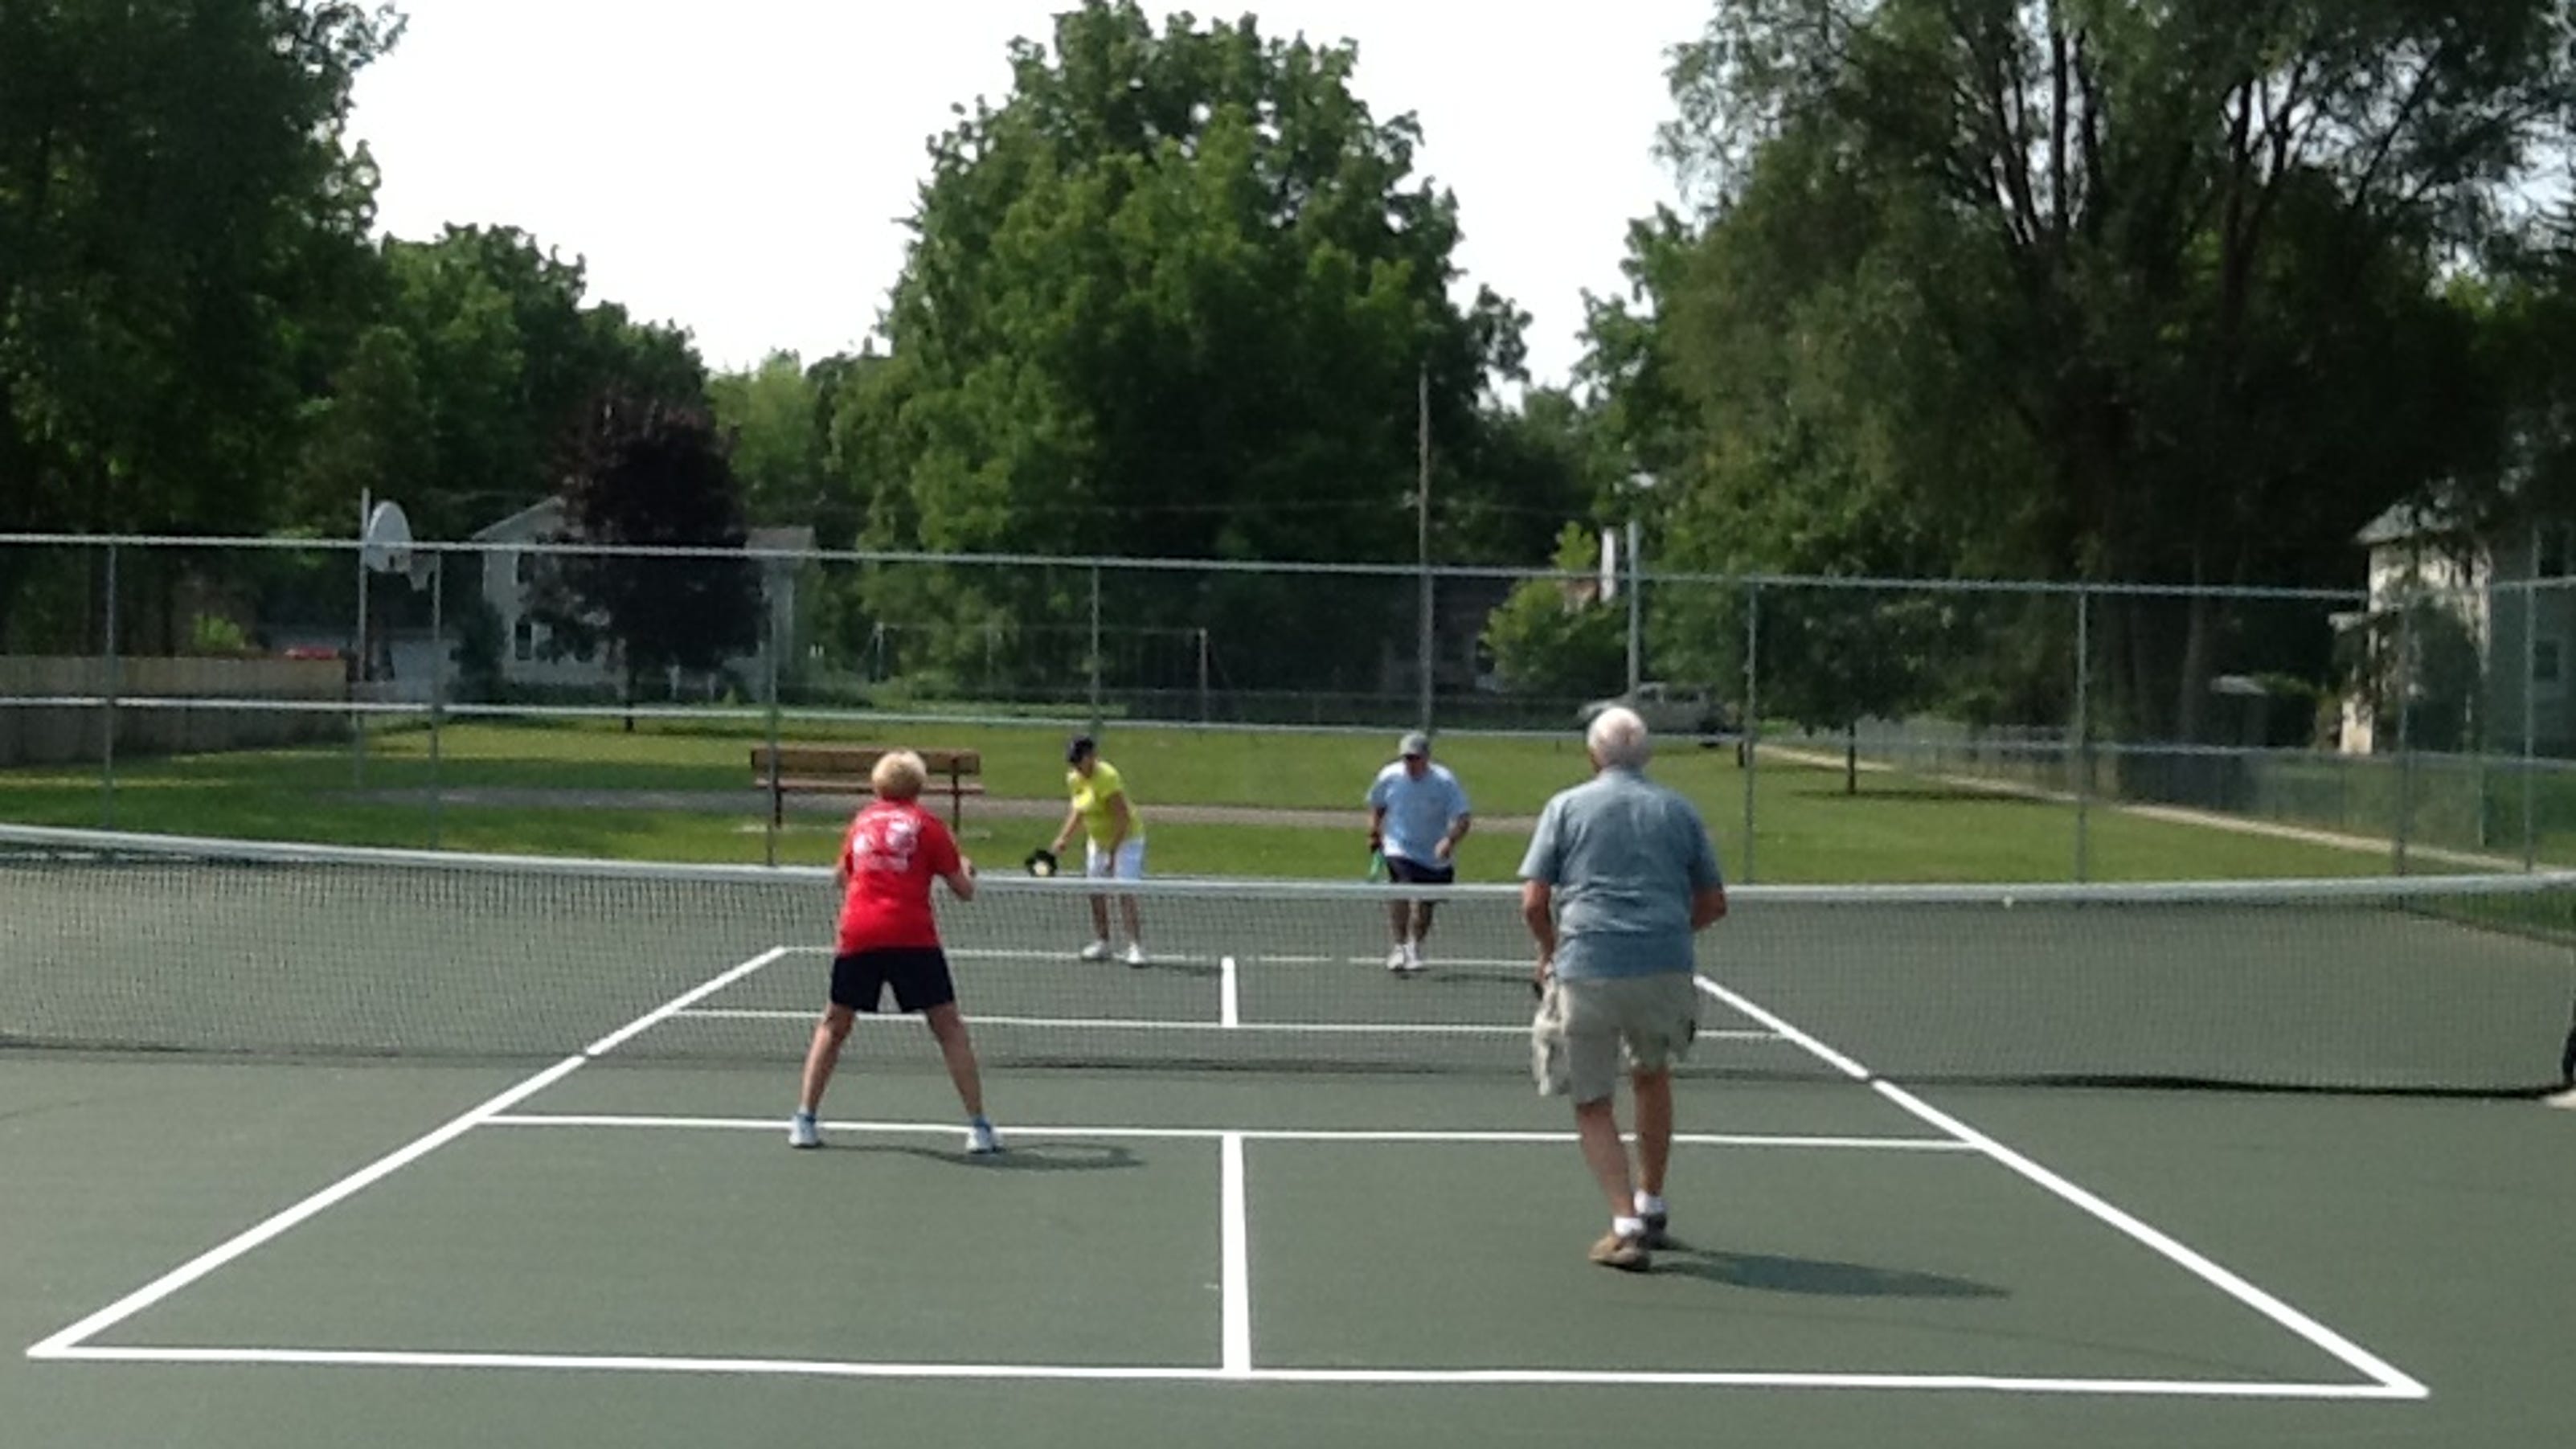 Two Outdoor Pickleball Courts Opening in Brockport